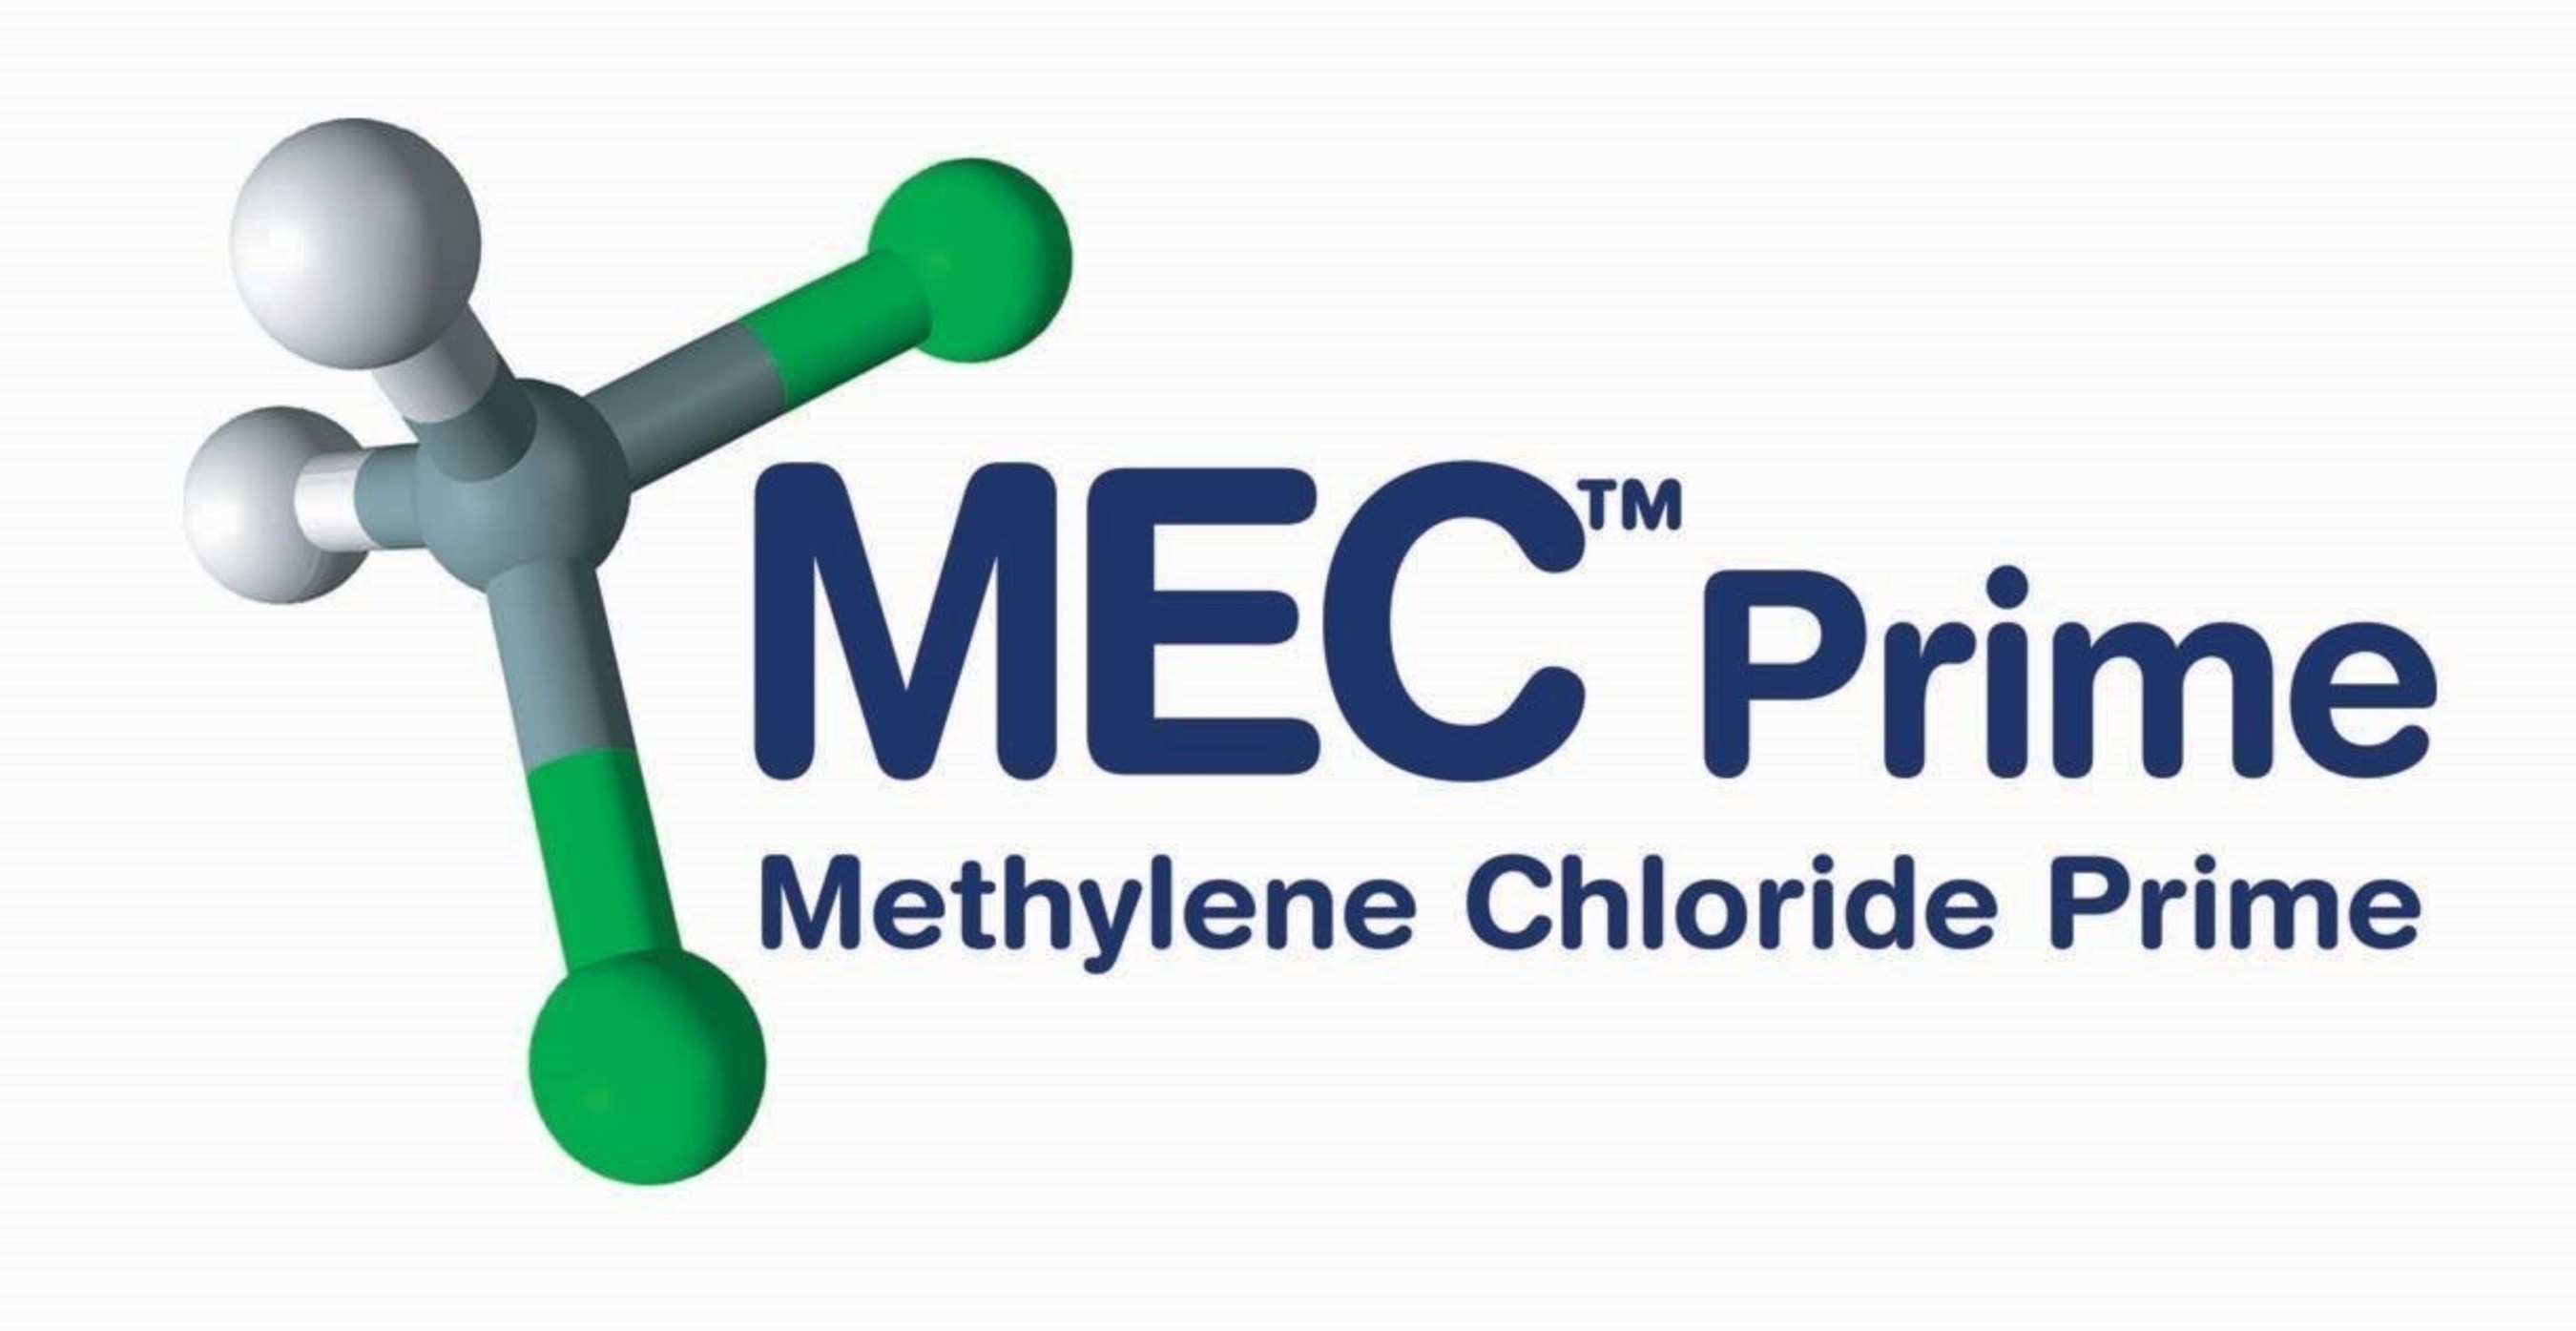 MEC(TM) Prime - Methylene Chloride Prime, High purity, PHARMACEUTICAL, FOOD & FEED grade and precision cleaning, DEGREASING grade (PRNewsFoto/Banner Chemicals UK) (PRNewsFoto/Banner Chemicals UK)